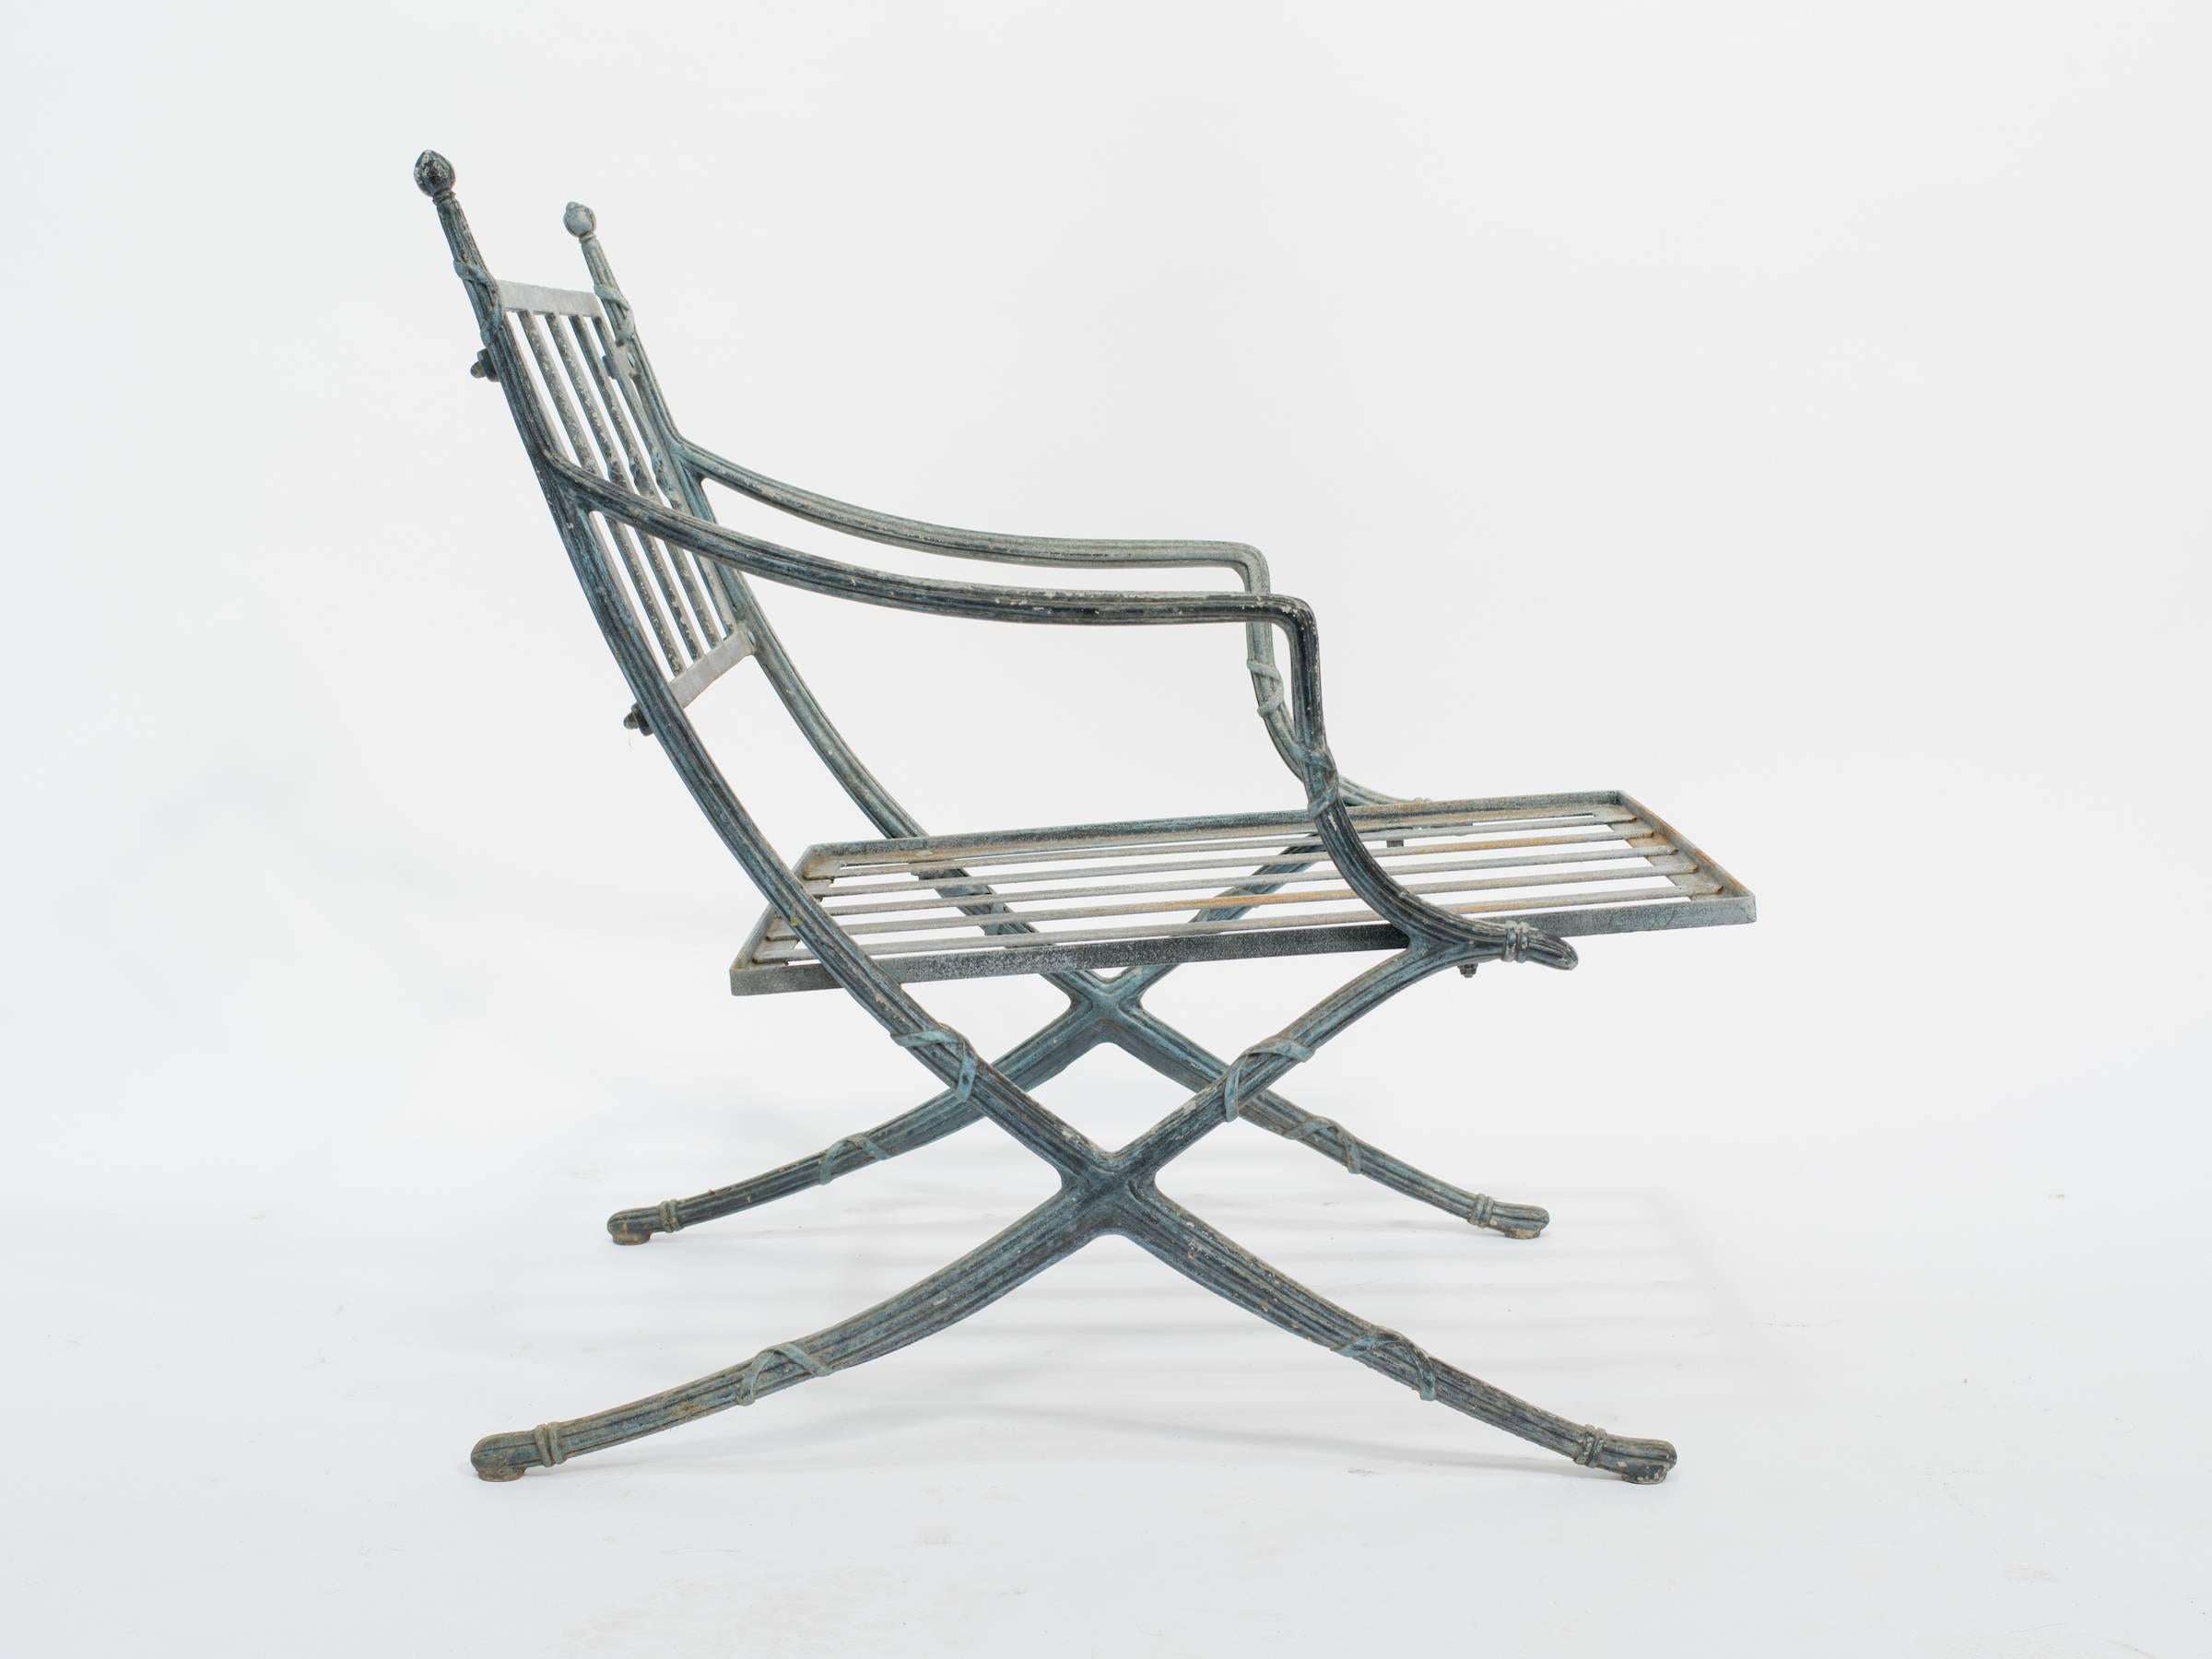 Pair of Classical Metal Outdoor Chairs 1